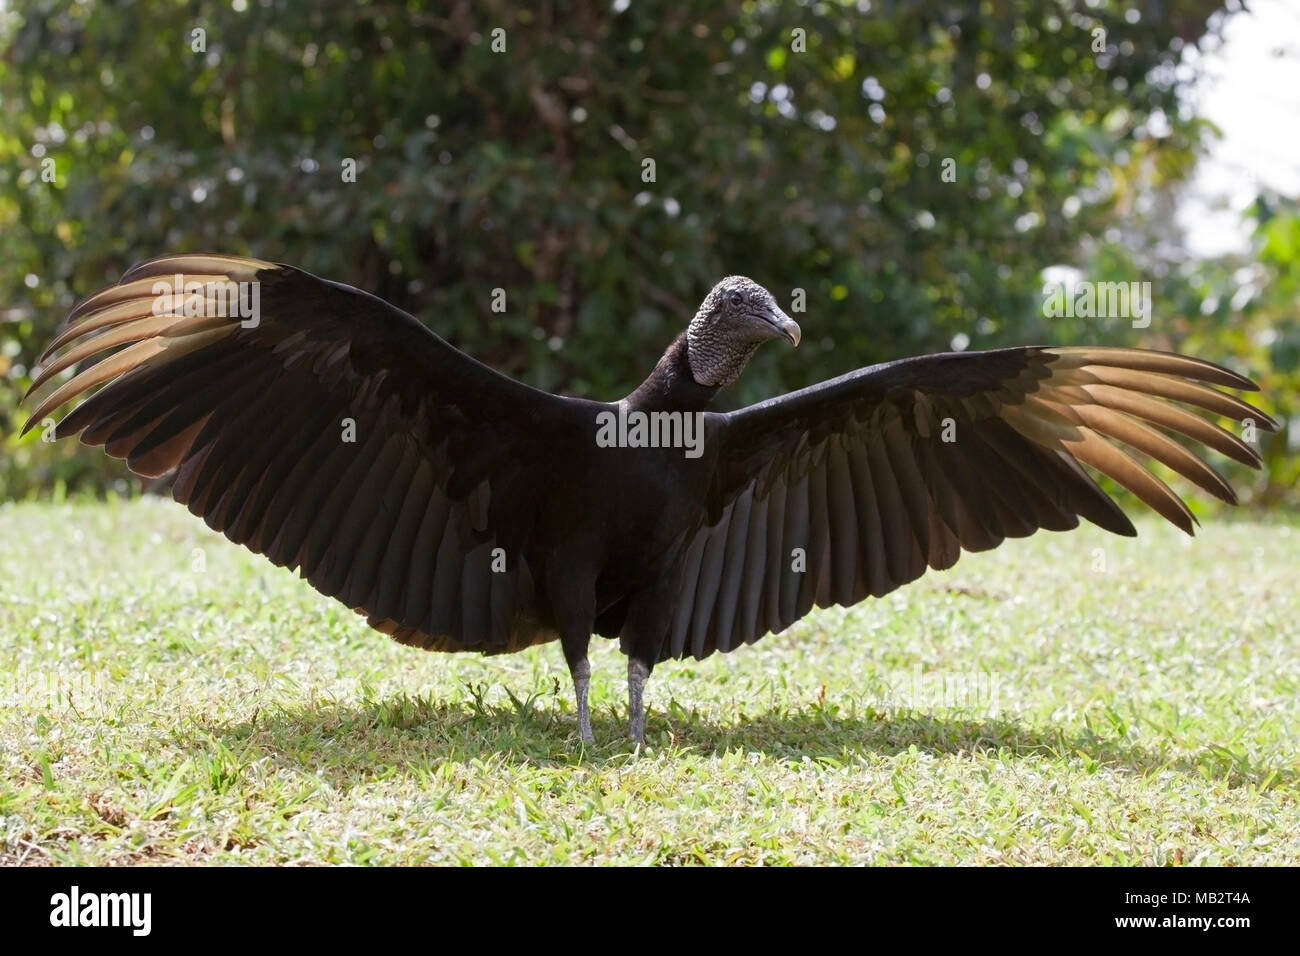 Black Vulture (Coragyps atratus) with wings outstretched Stock Photo